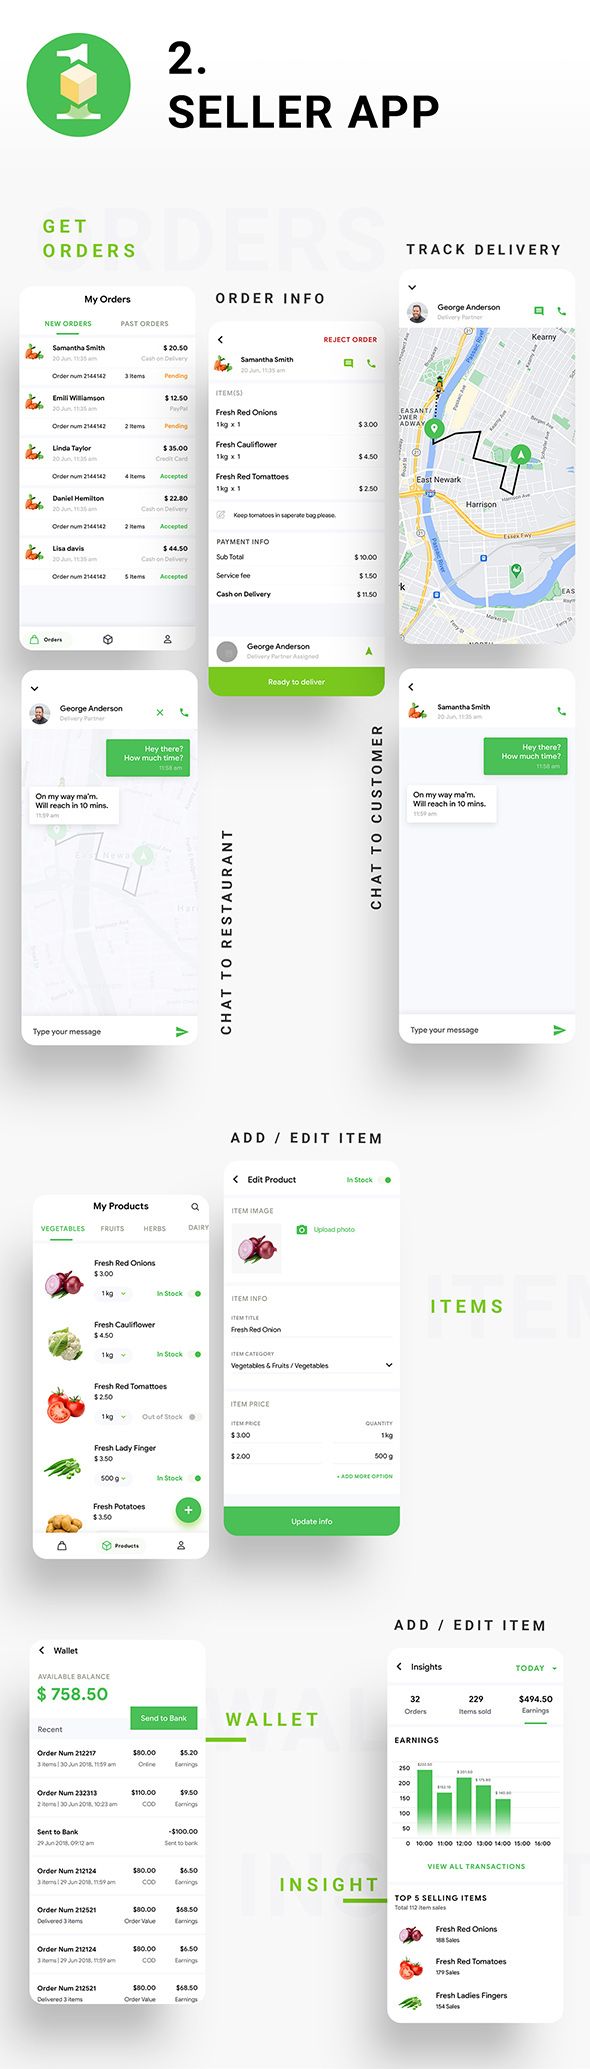 6 App Template | eCommerce Food Grocery Delivery App | Peer to Peer Delivery | Courier App | DeliOne - 5